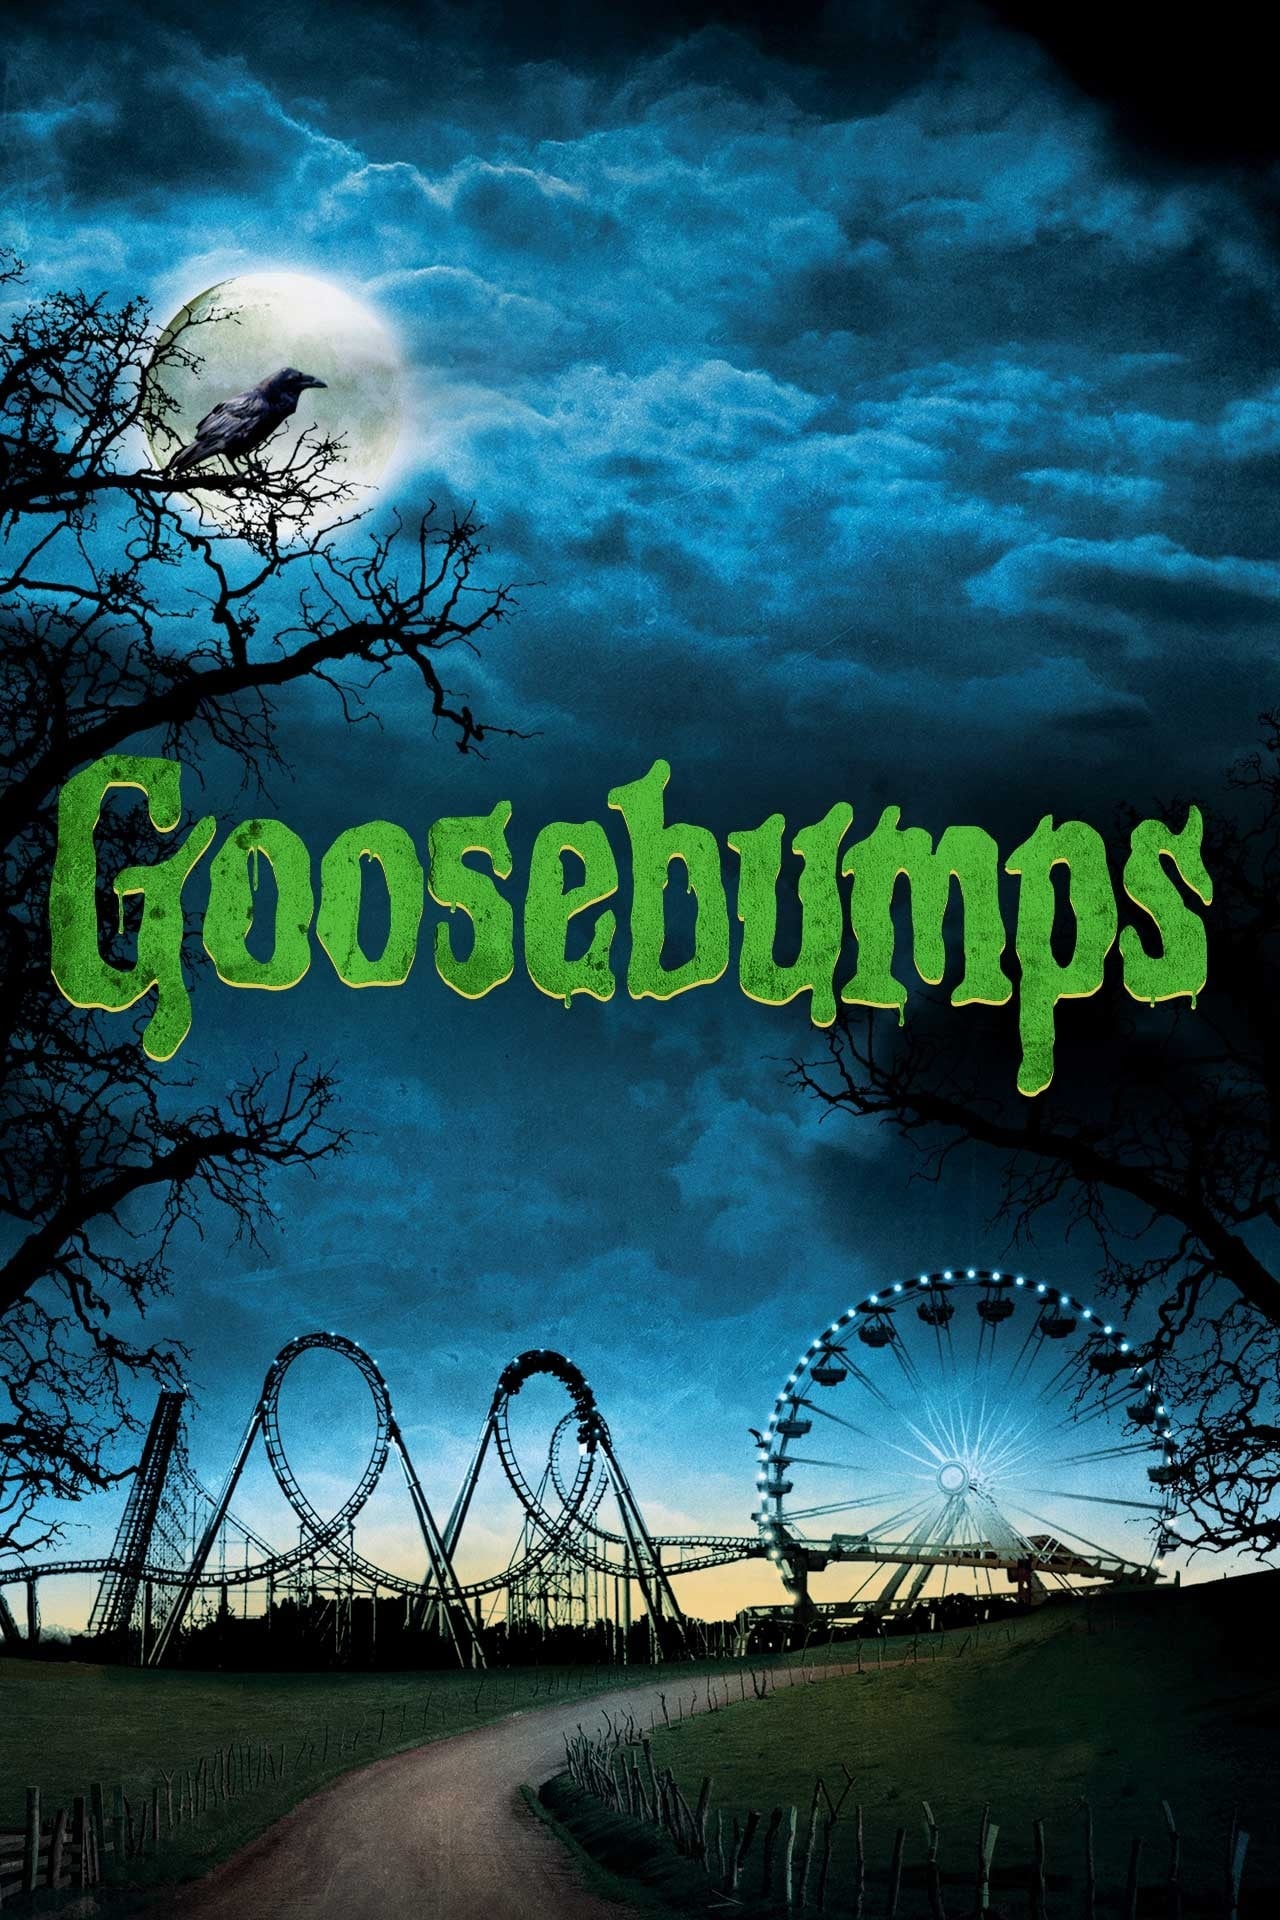 Goosebumps (TV Series): A series of scary anthology stories, Teens finding themselves in creepy and unusual situations. 1280x1920 HD Wallpaper.